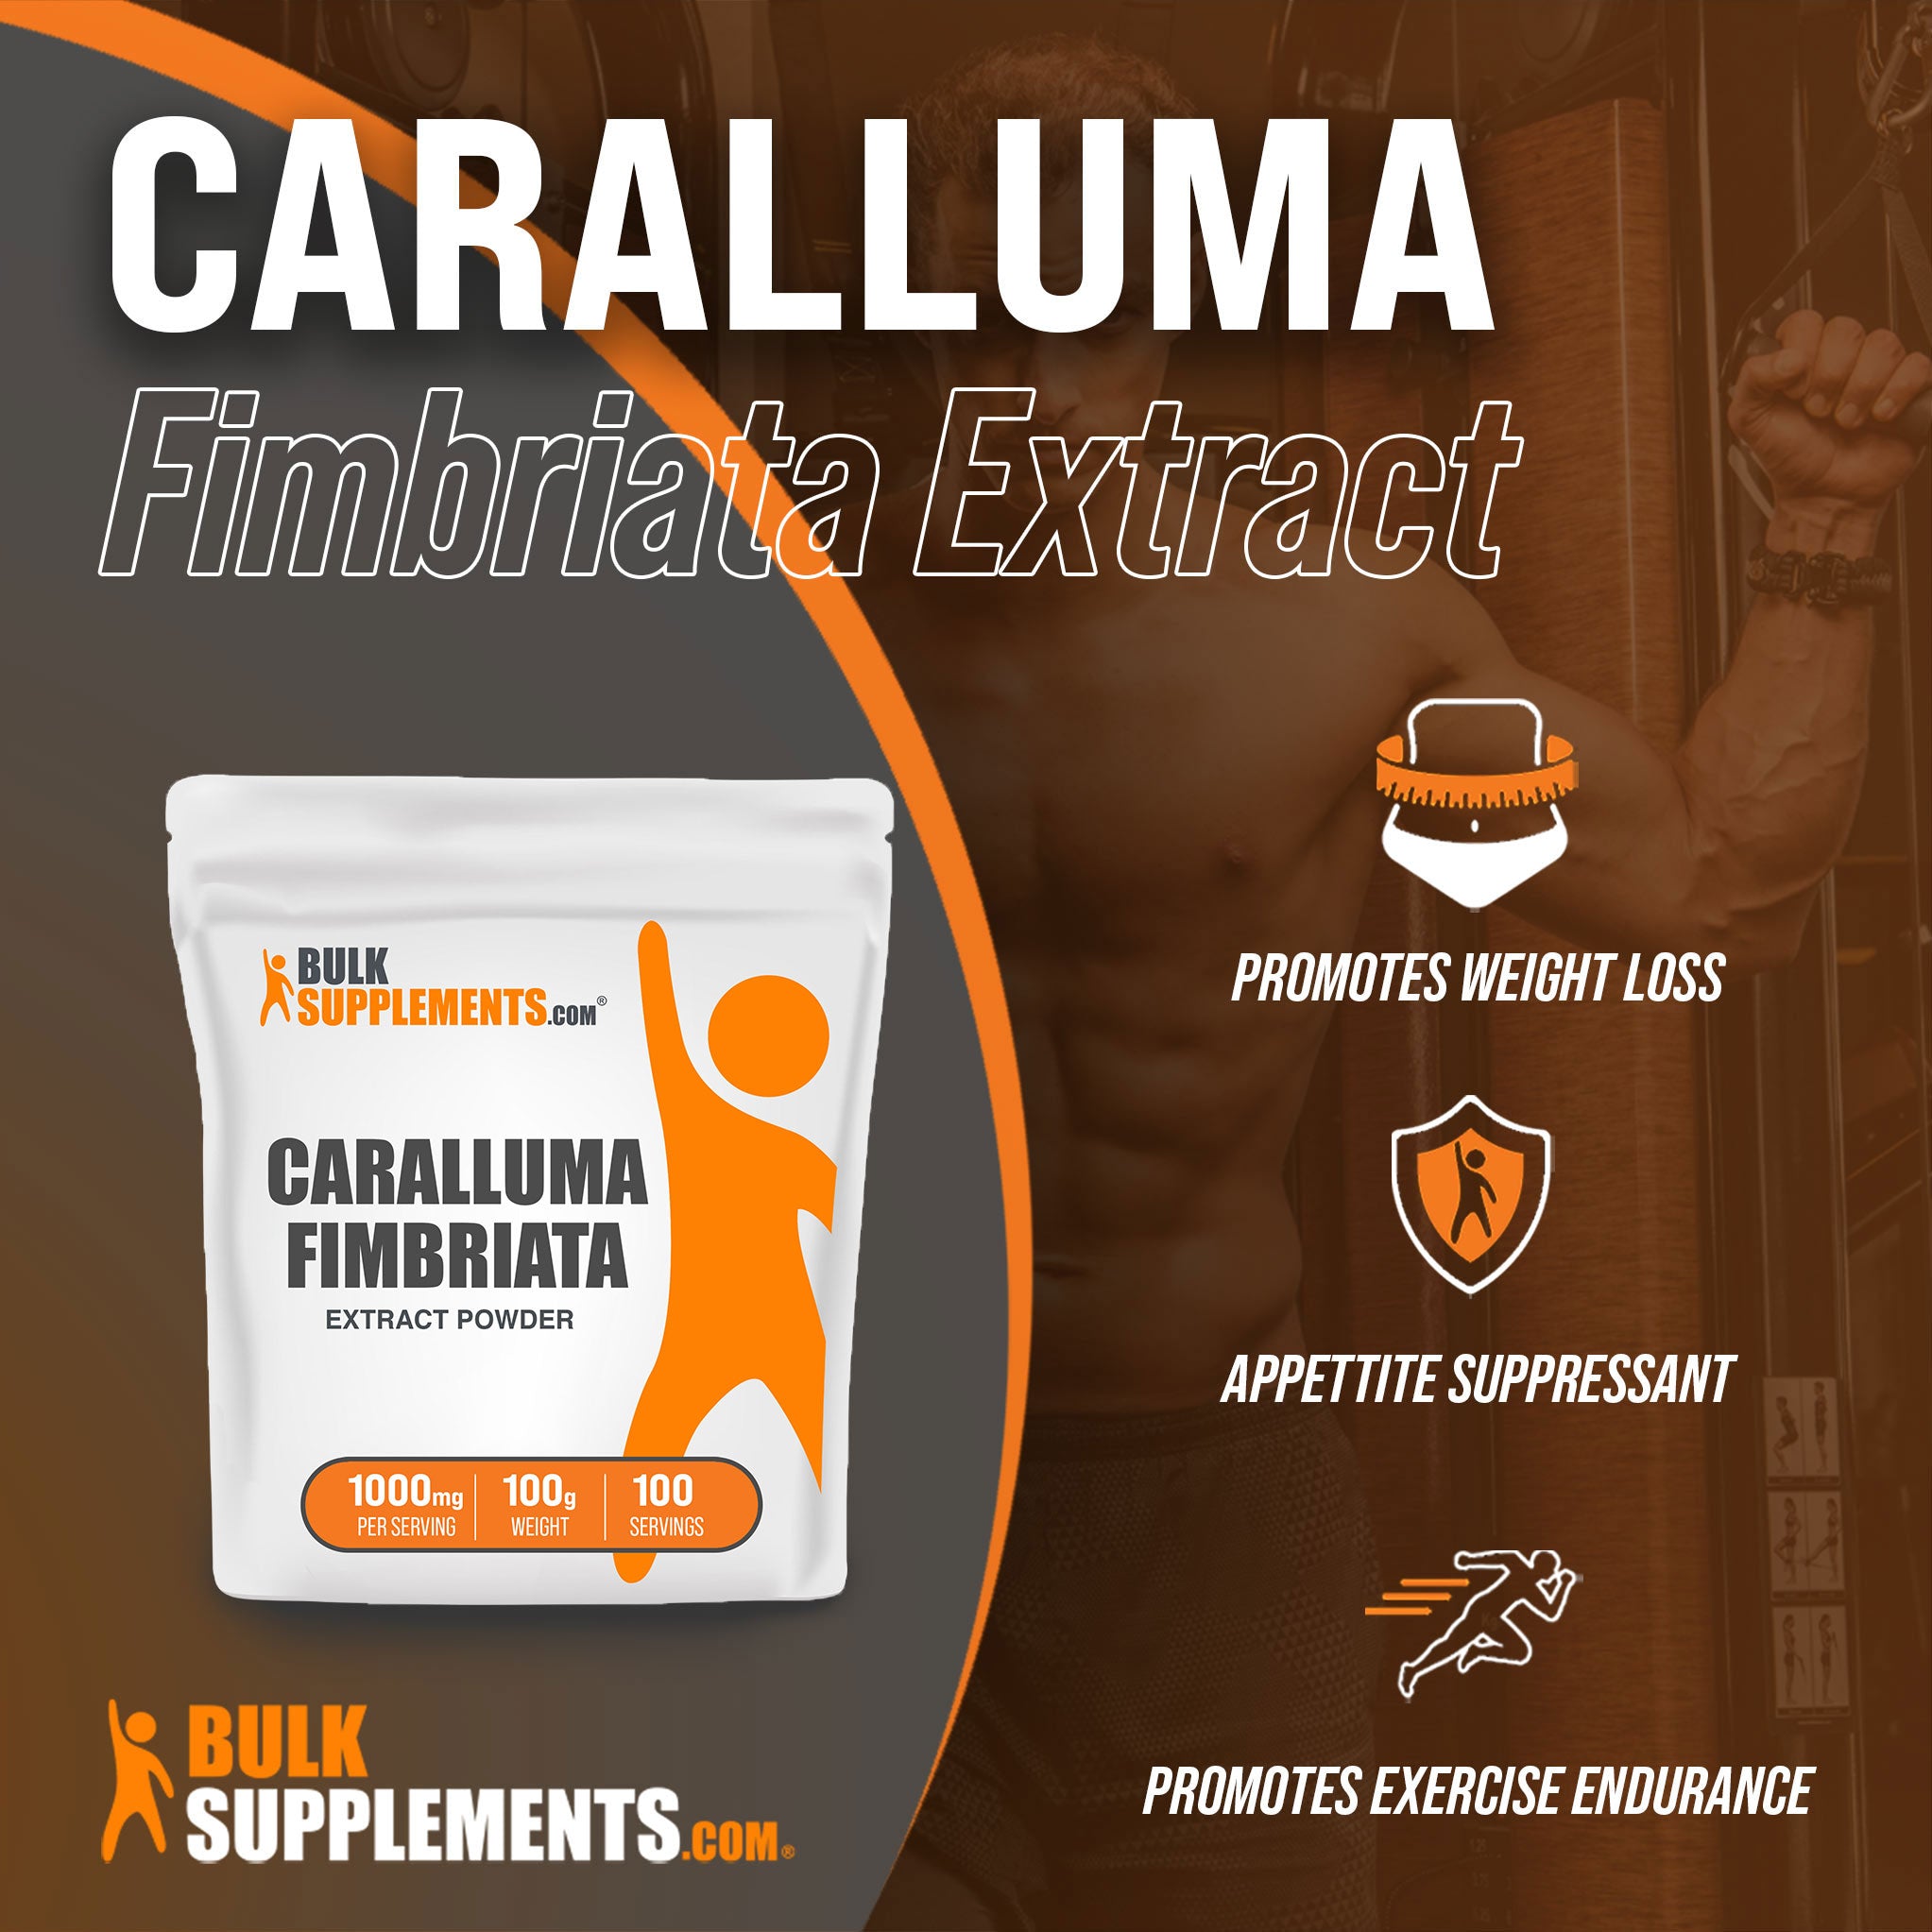 Benefits of Caralluma Fimbriata Extract; promotes weight loss, appetite suppressant, promotes exercise endurance